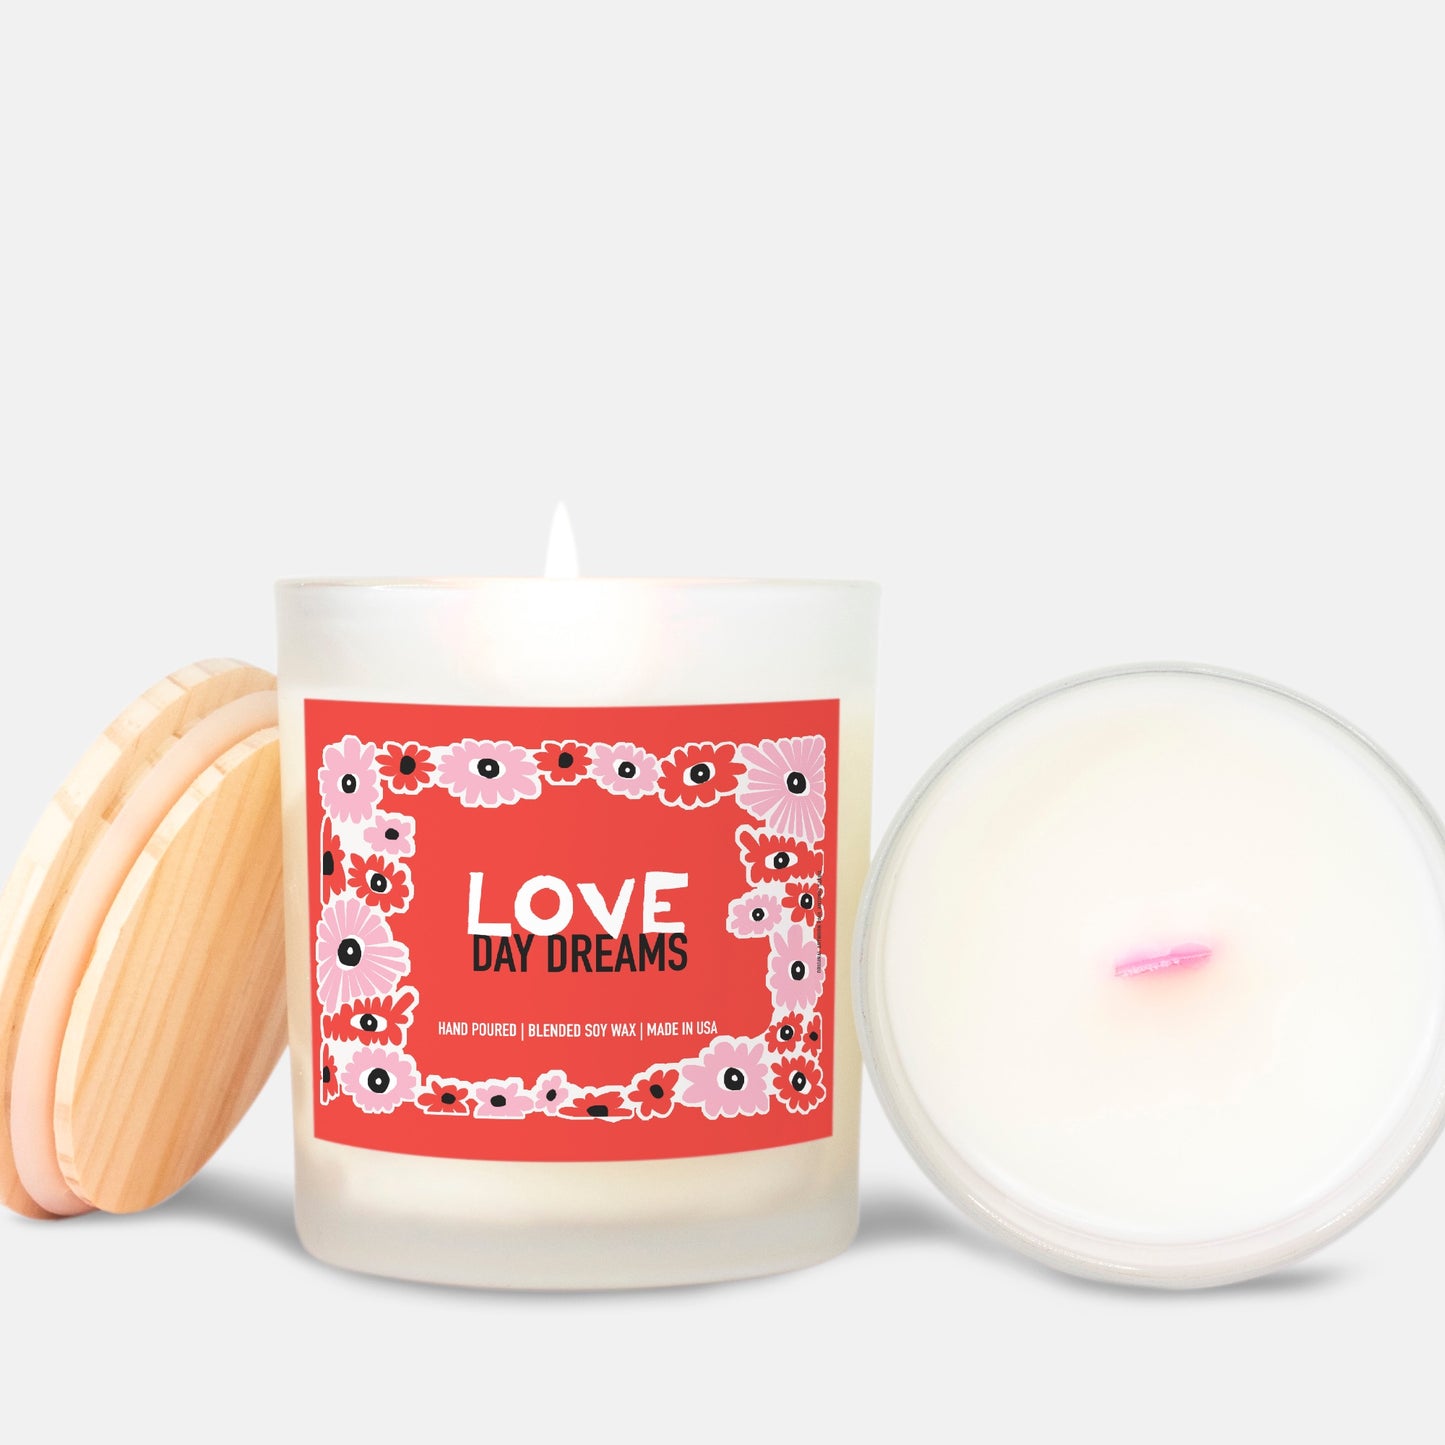 My Love Day Dreams Frosted Glass Candle With Pink Wick